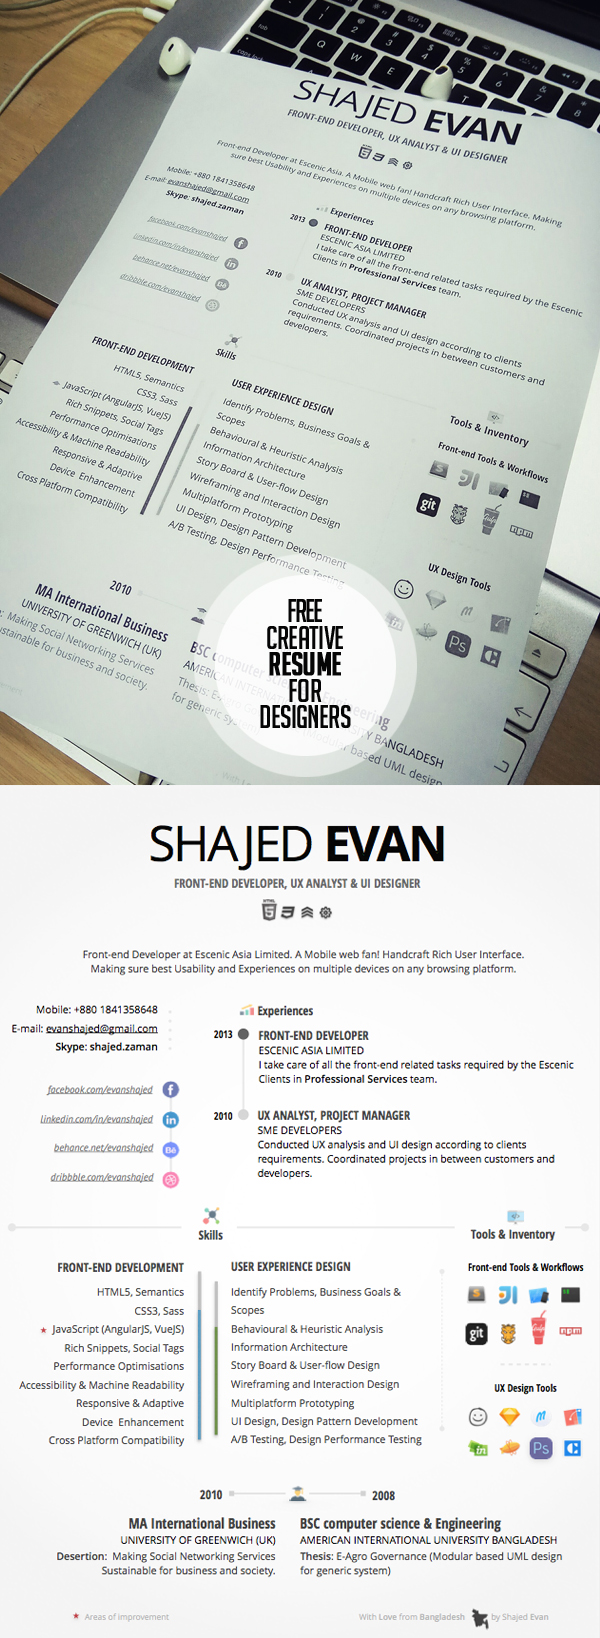 Free Creative Resume for Designers & Developers